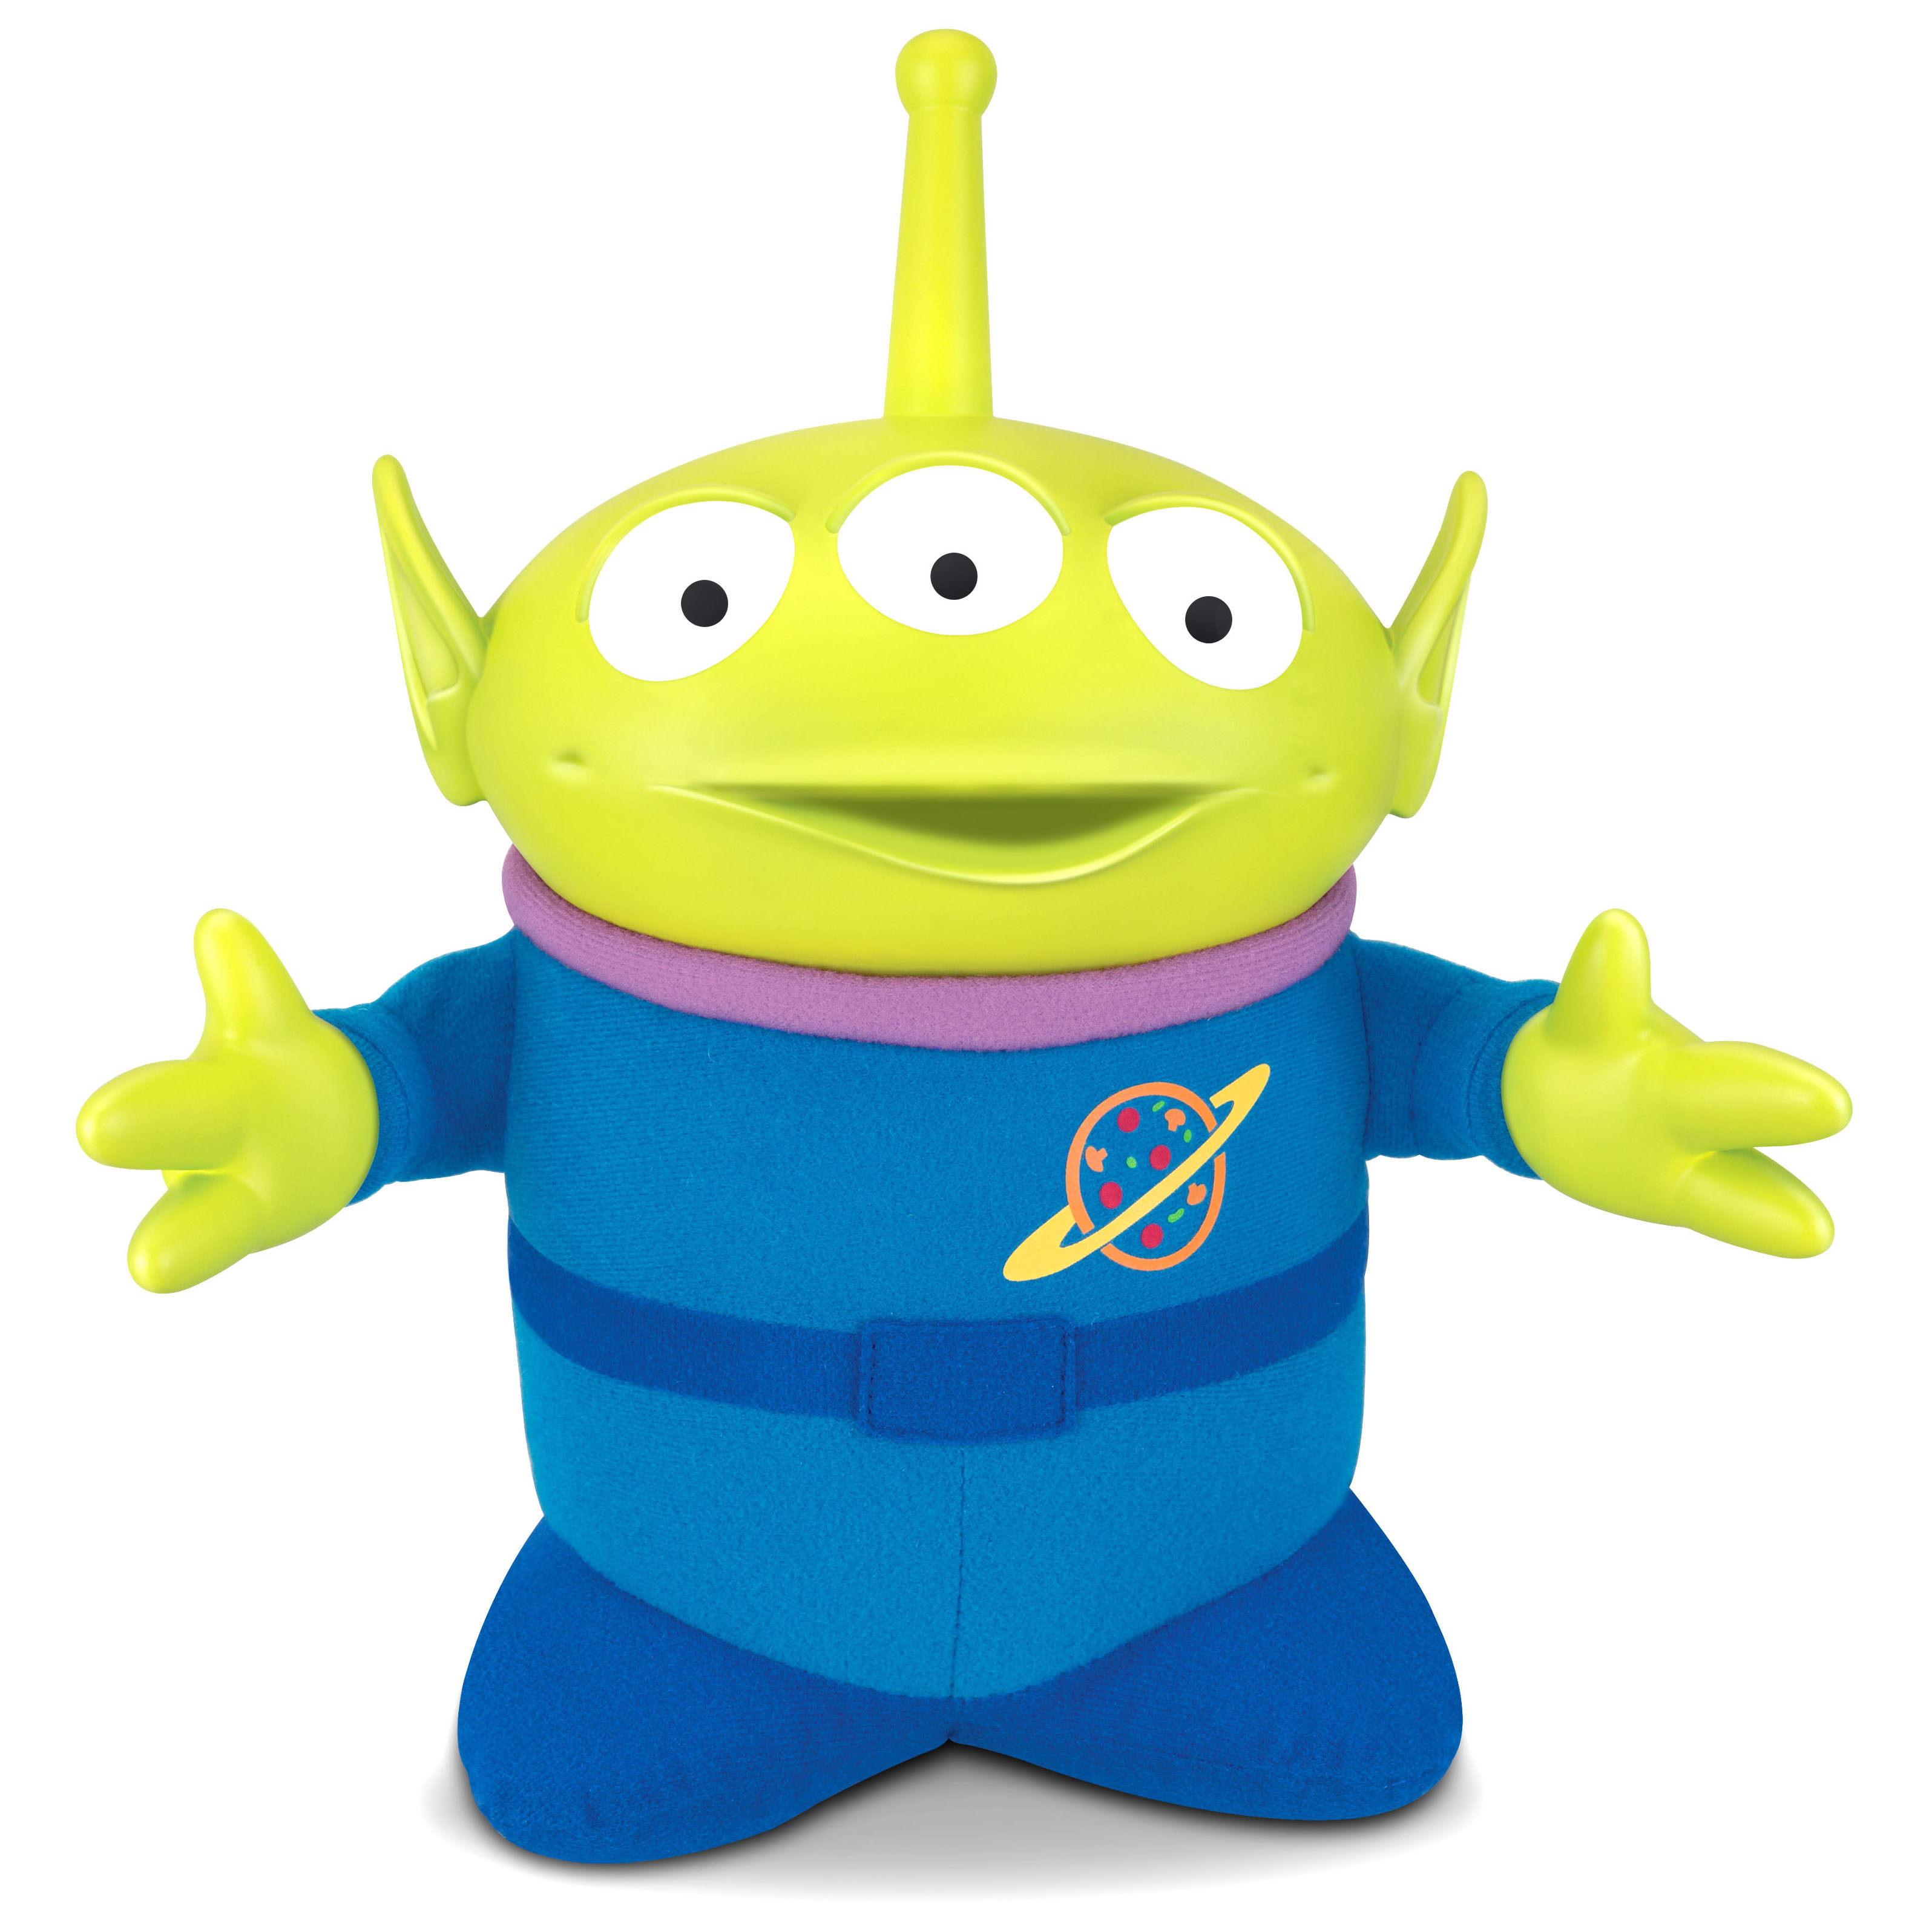 Disney Pixar Toy Story SPACE ALIEN Talks with Light-Up Antenna - image 1 of 5